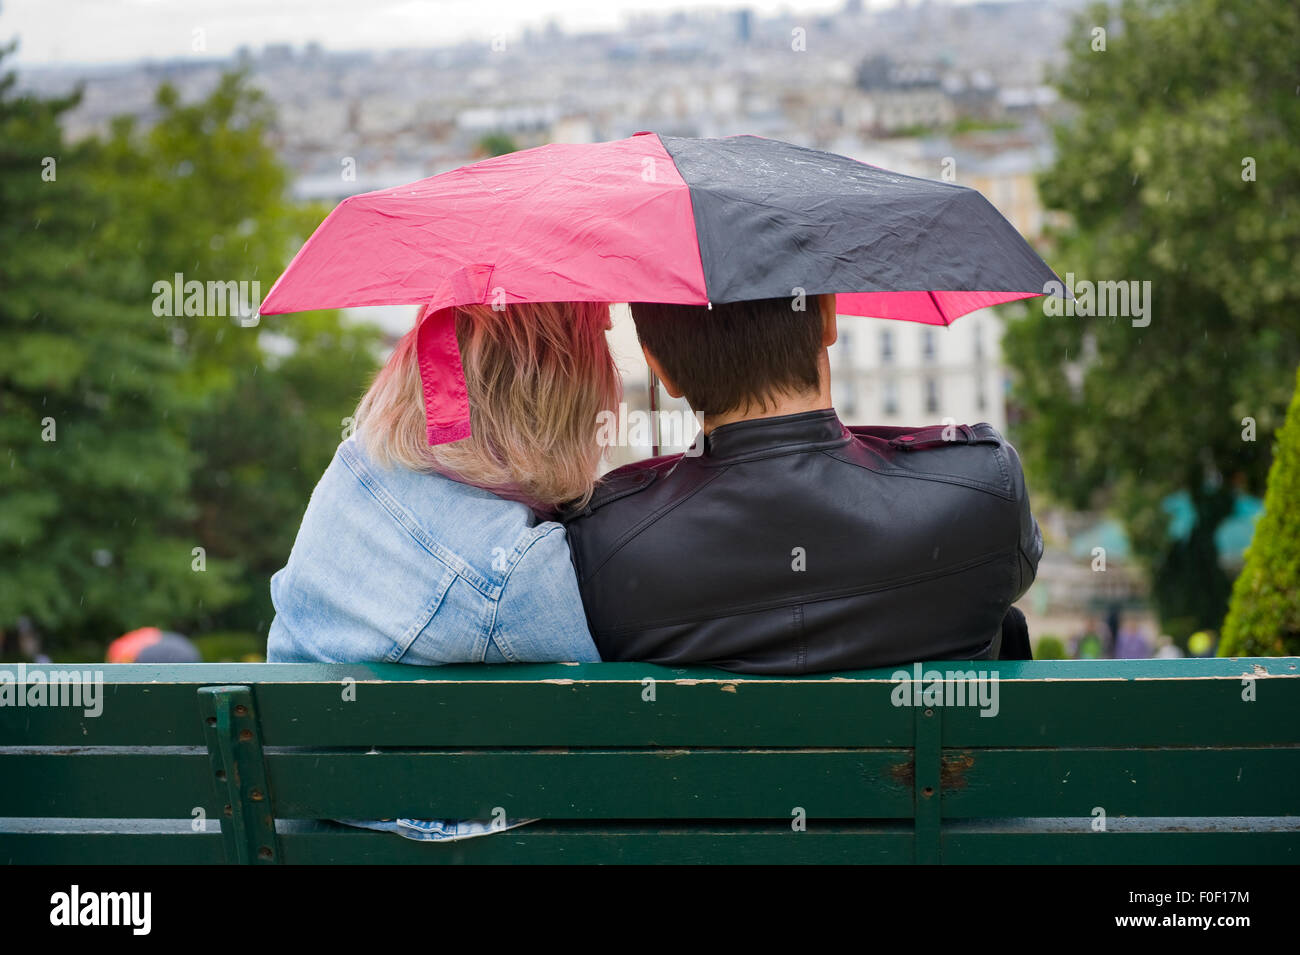 PARIS, FRANCE - JULY 27, 2015: A couple is sitting on a bench under an umbrella during a rainy day in Mont Matre in Paris in Fra Stock Photo